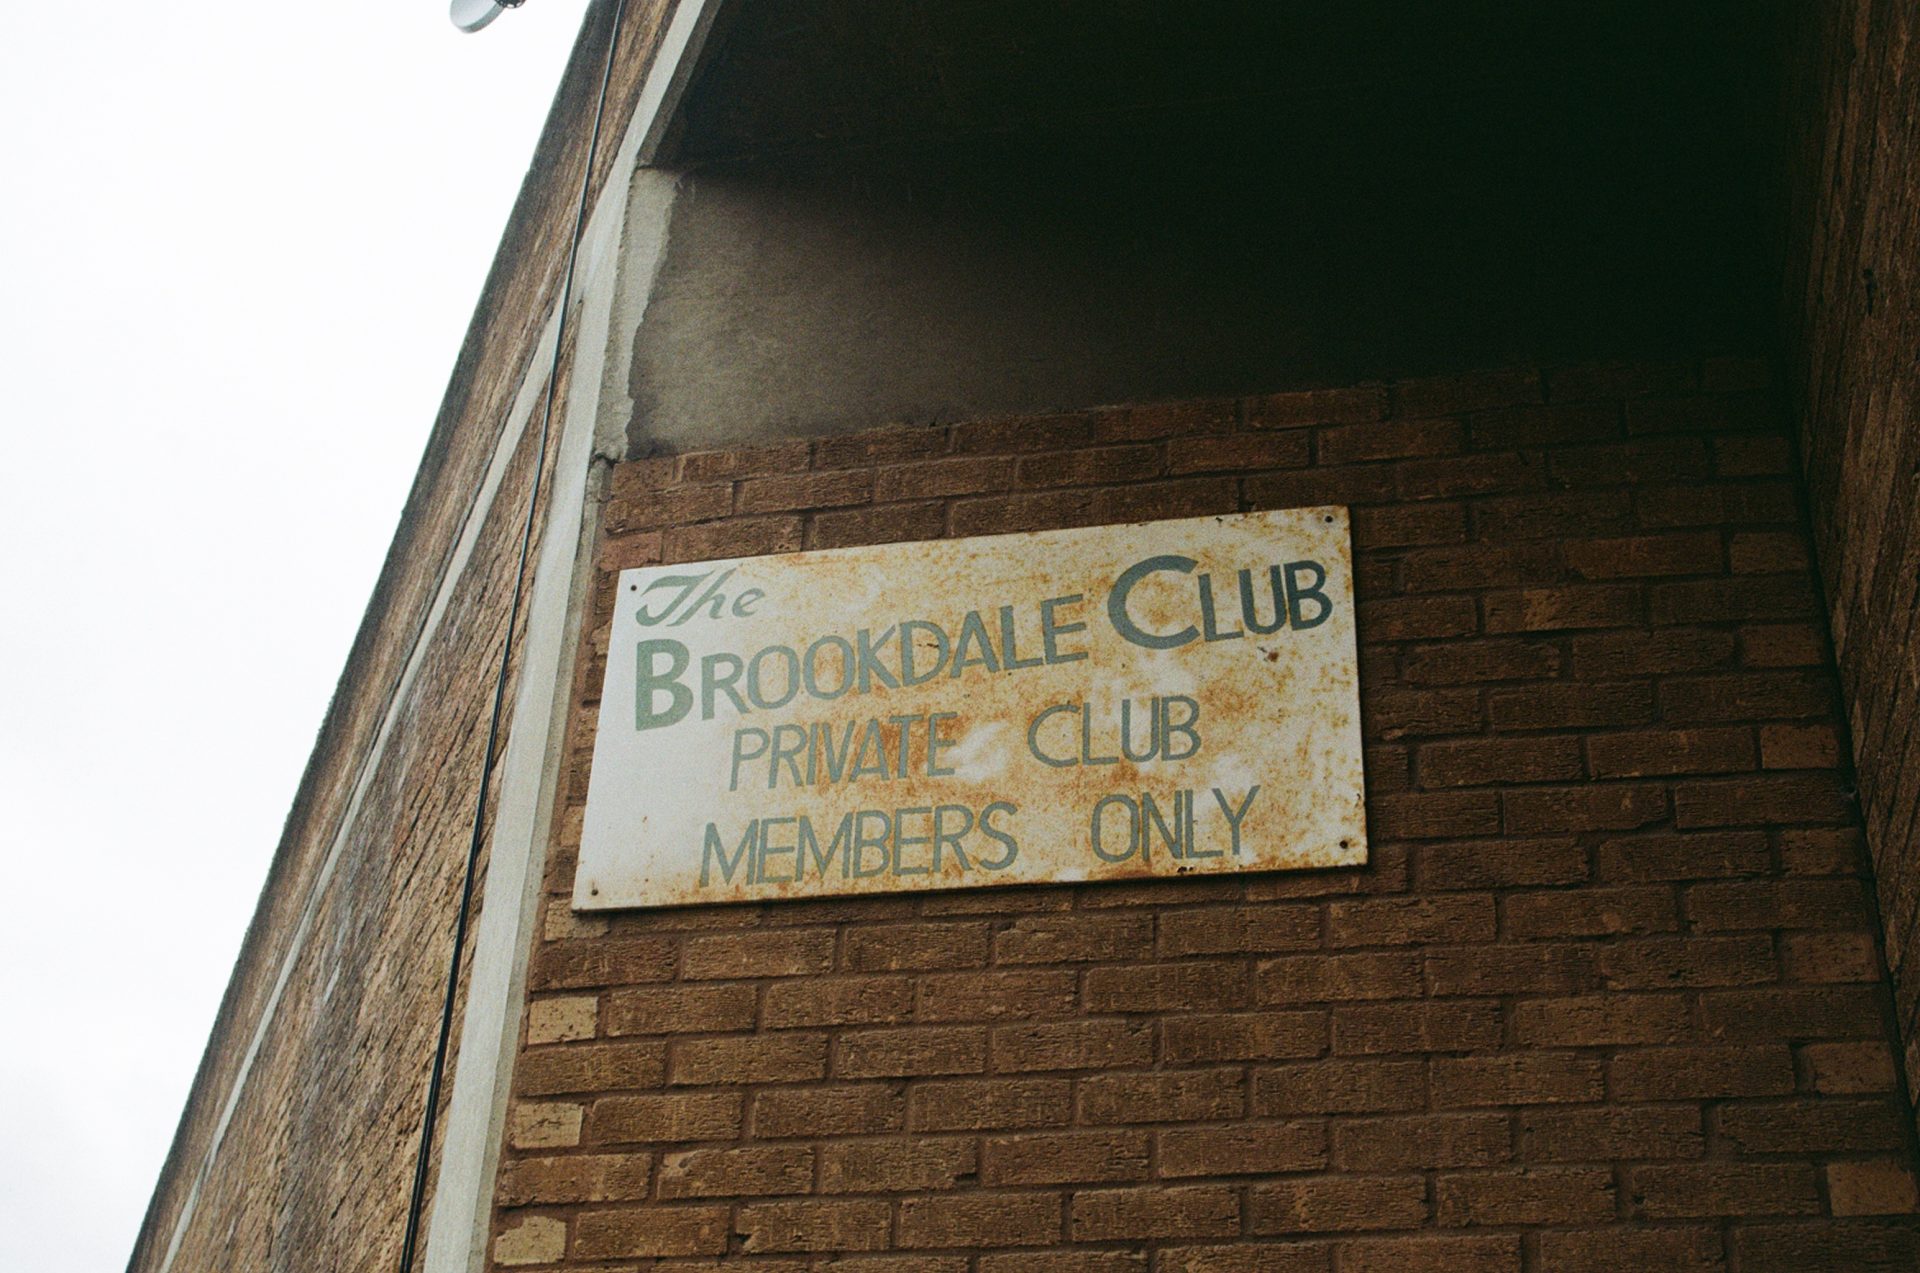 A sign which says 'the brookdale club private club members only' on a brick wall.